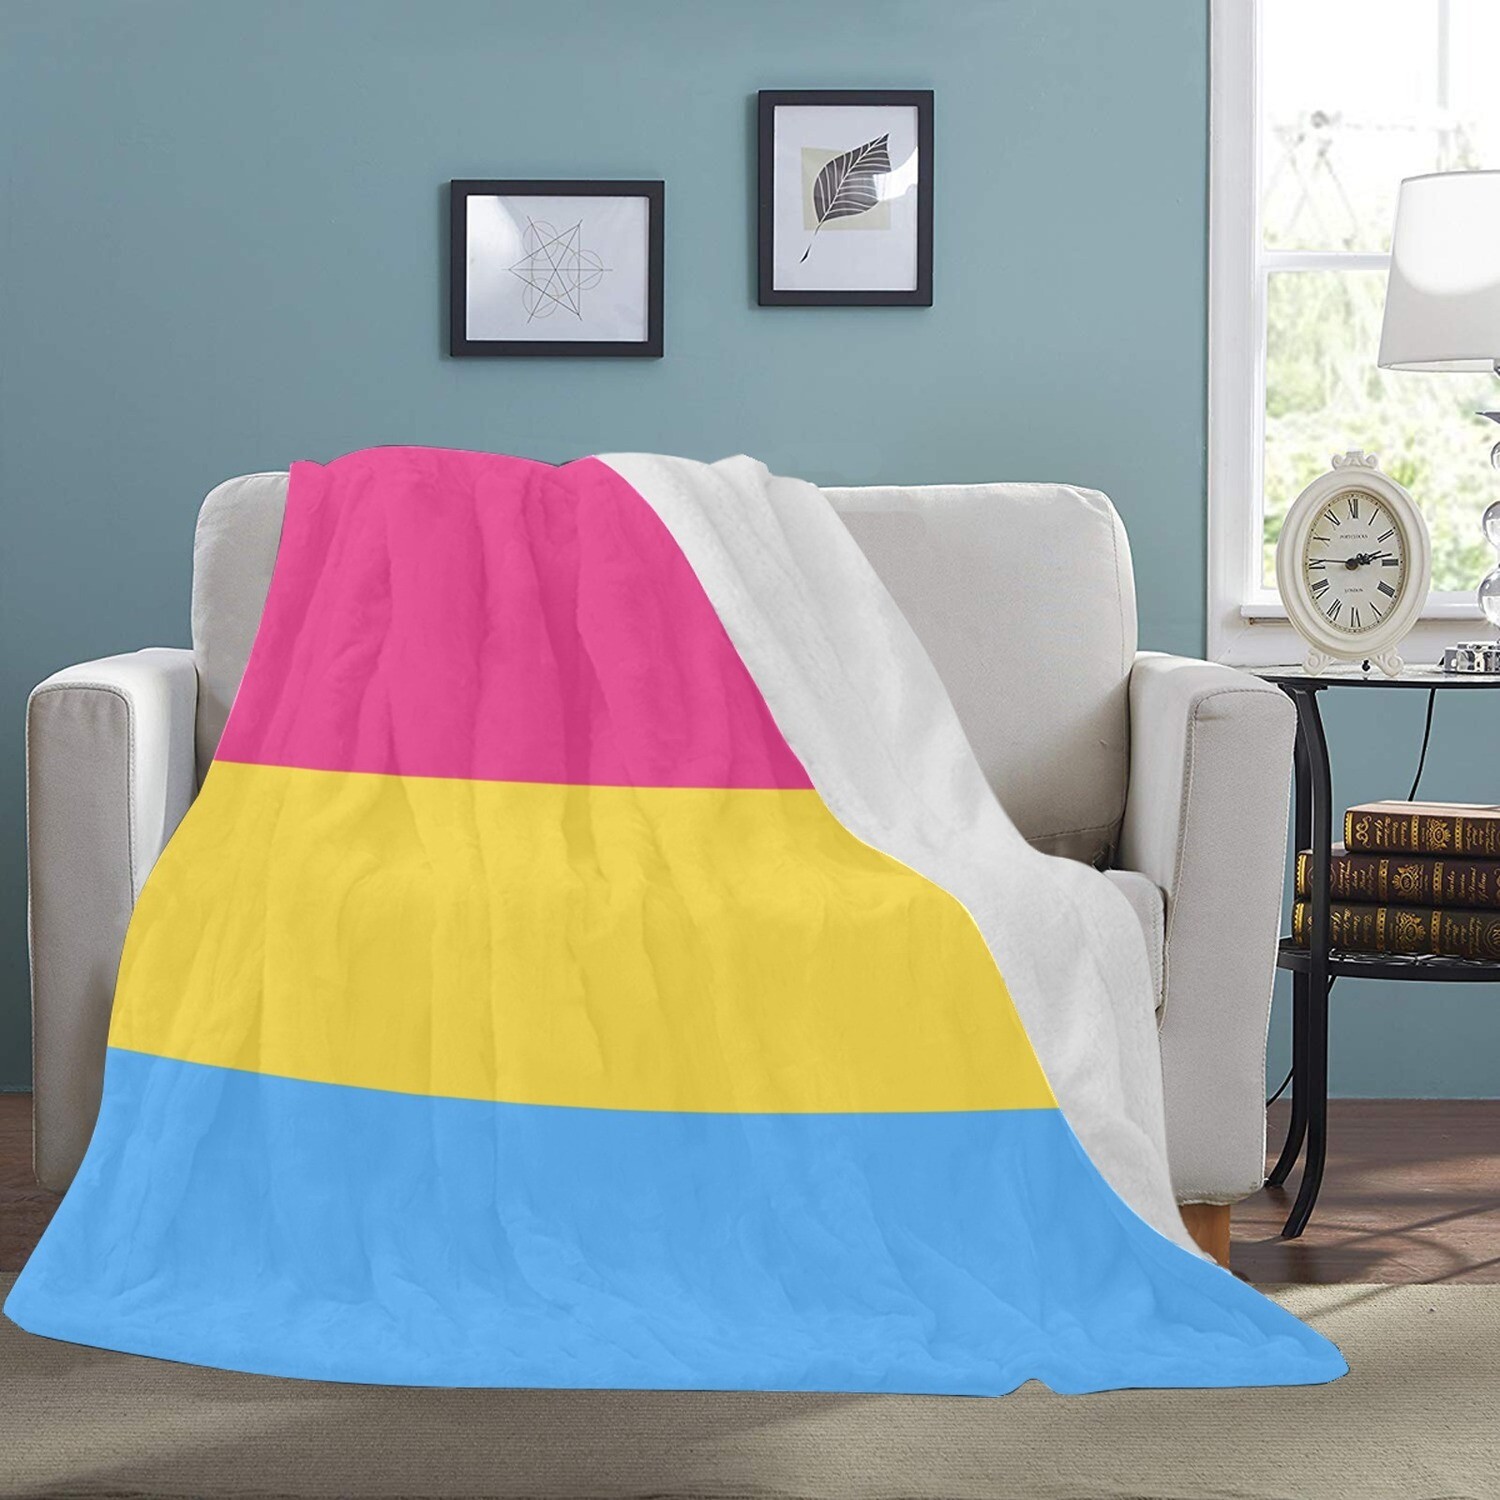 🤴🏽👸🏽🏳️‍🌈 Large Ultra-Soft Micro Fleece Blanket Love is Love Pansexual Pride Flag, gift, gift for her, gift for him, gift for them, 70"x80"